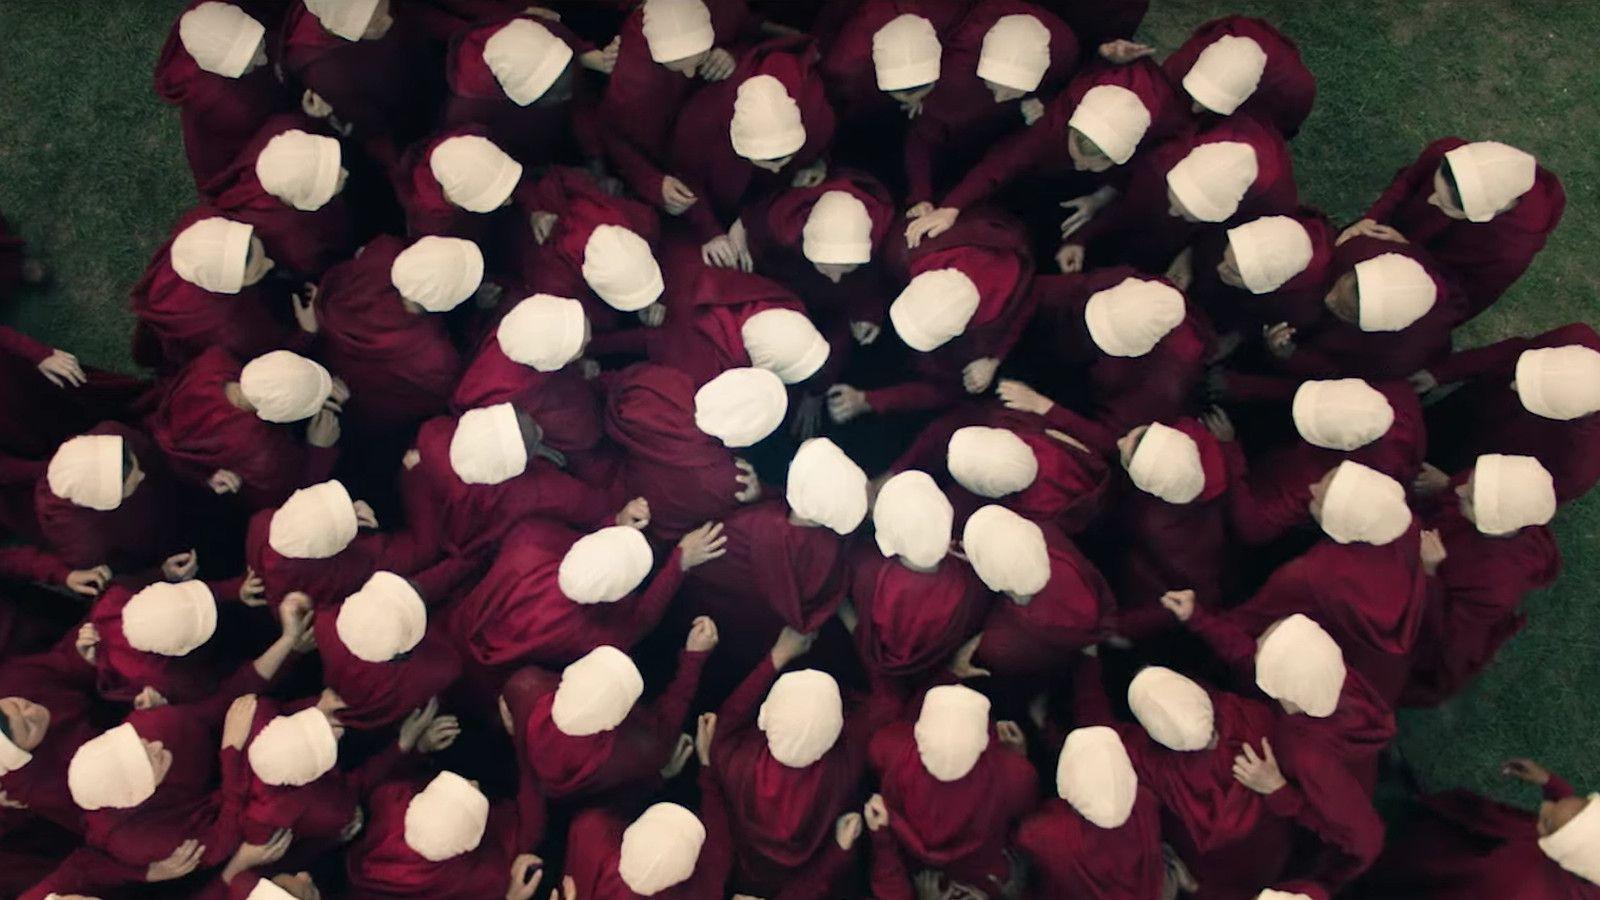 The full trailer for Hulu's Handmaid's Tale shows the rise